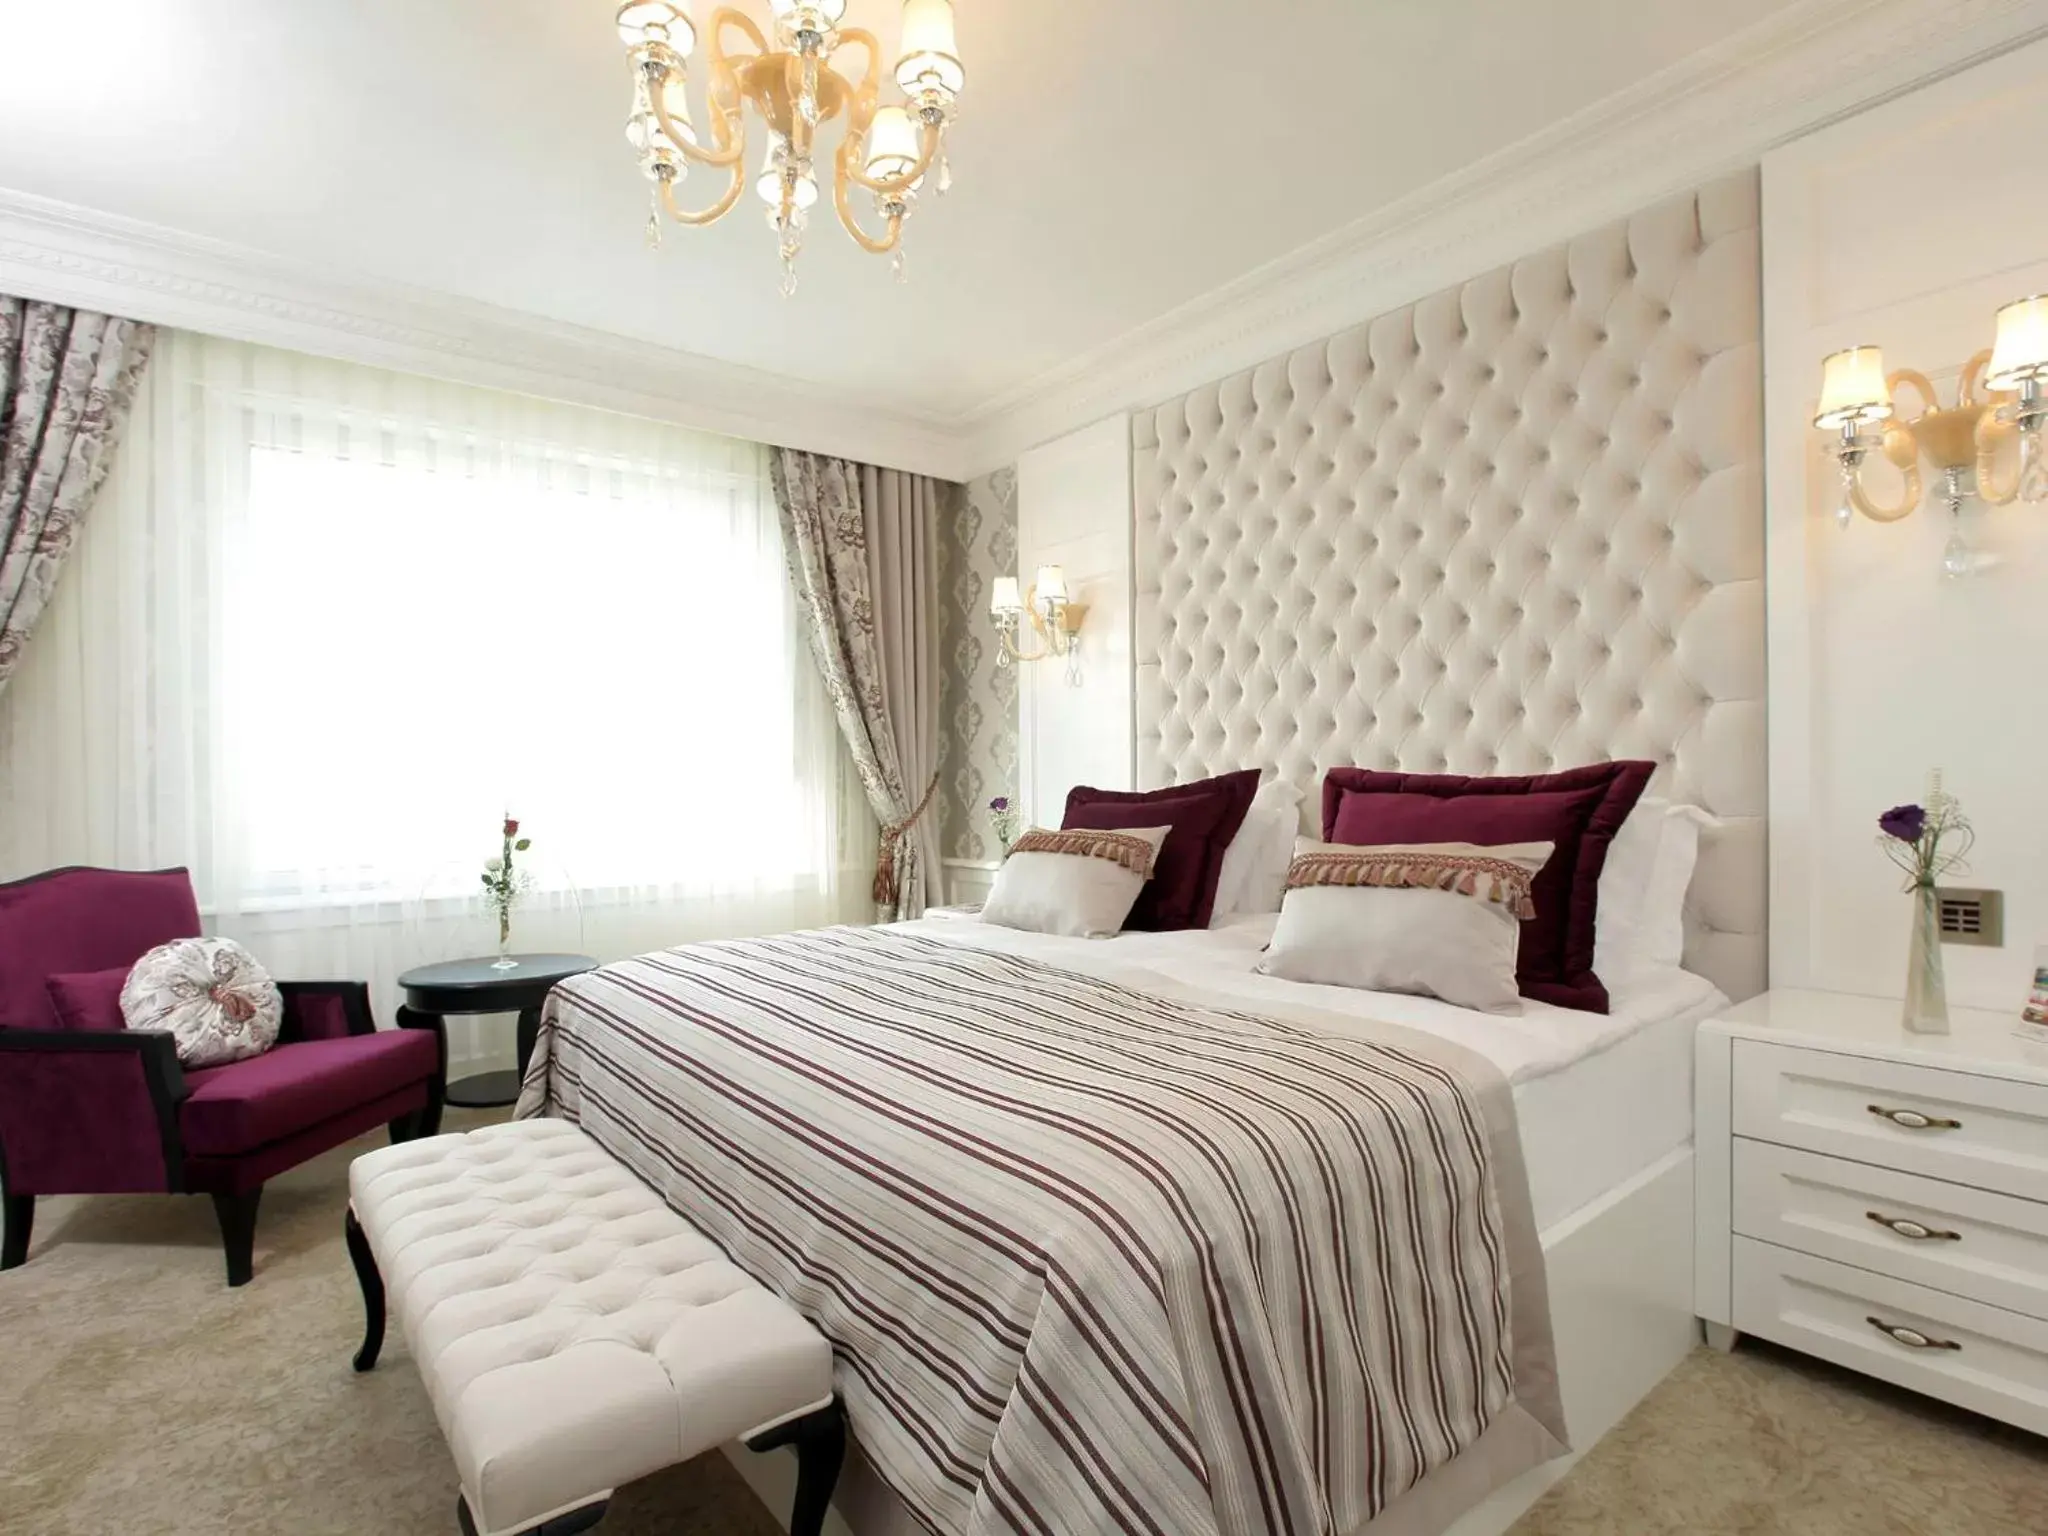 Bed, Room Photo in WOW Istanbul Hotel